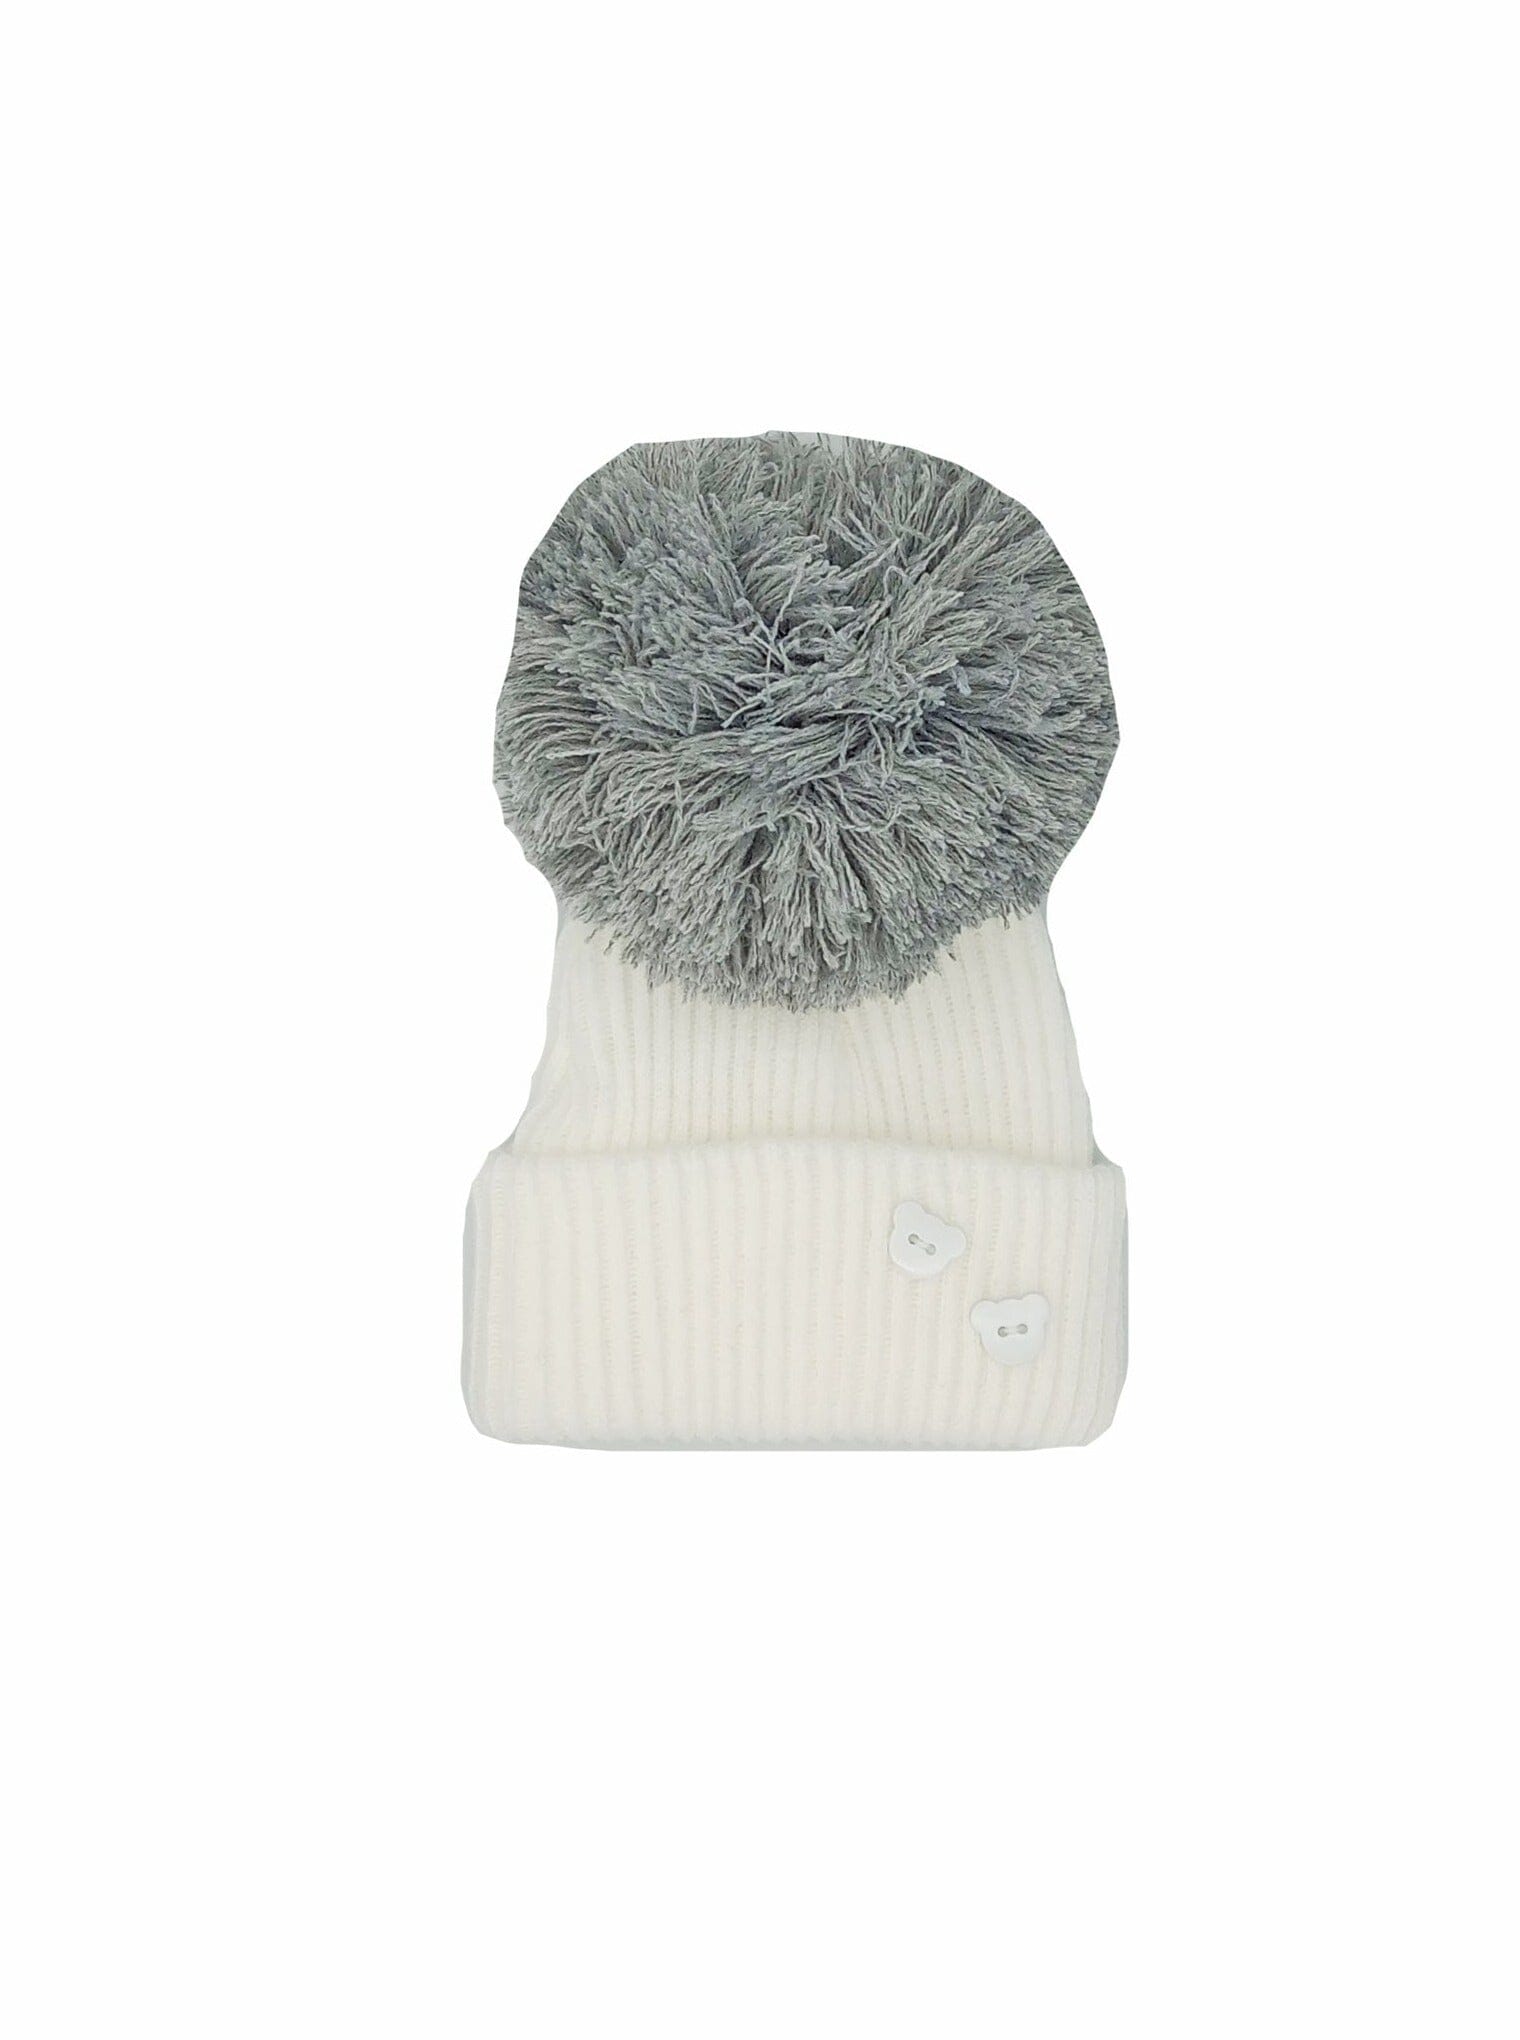 White Knitted Hat with Grey Pom Pom Hat Little Mouse Baby Clothing and Gifts Ltd 